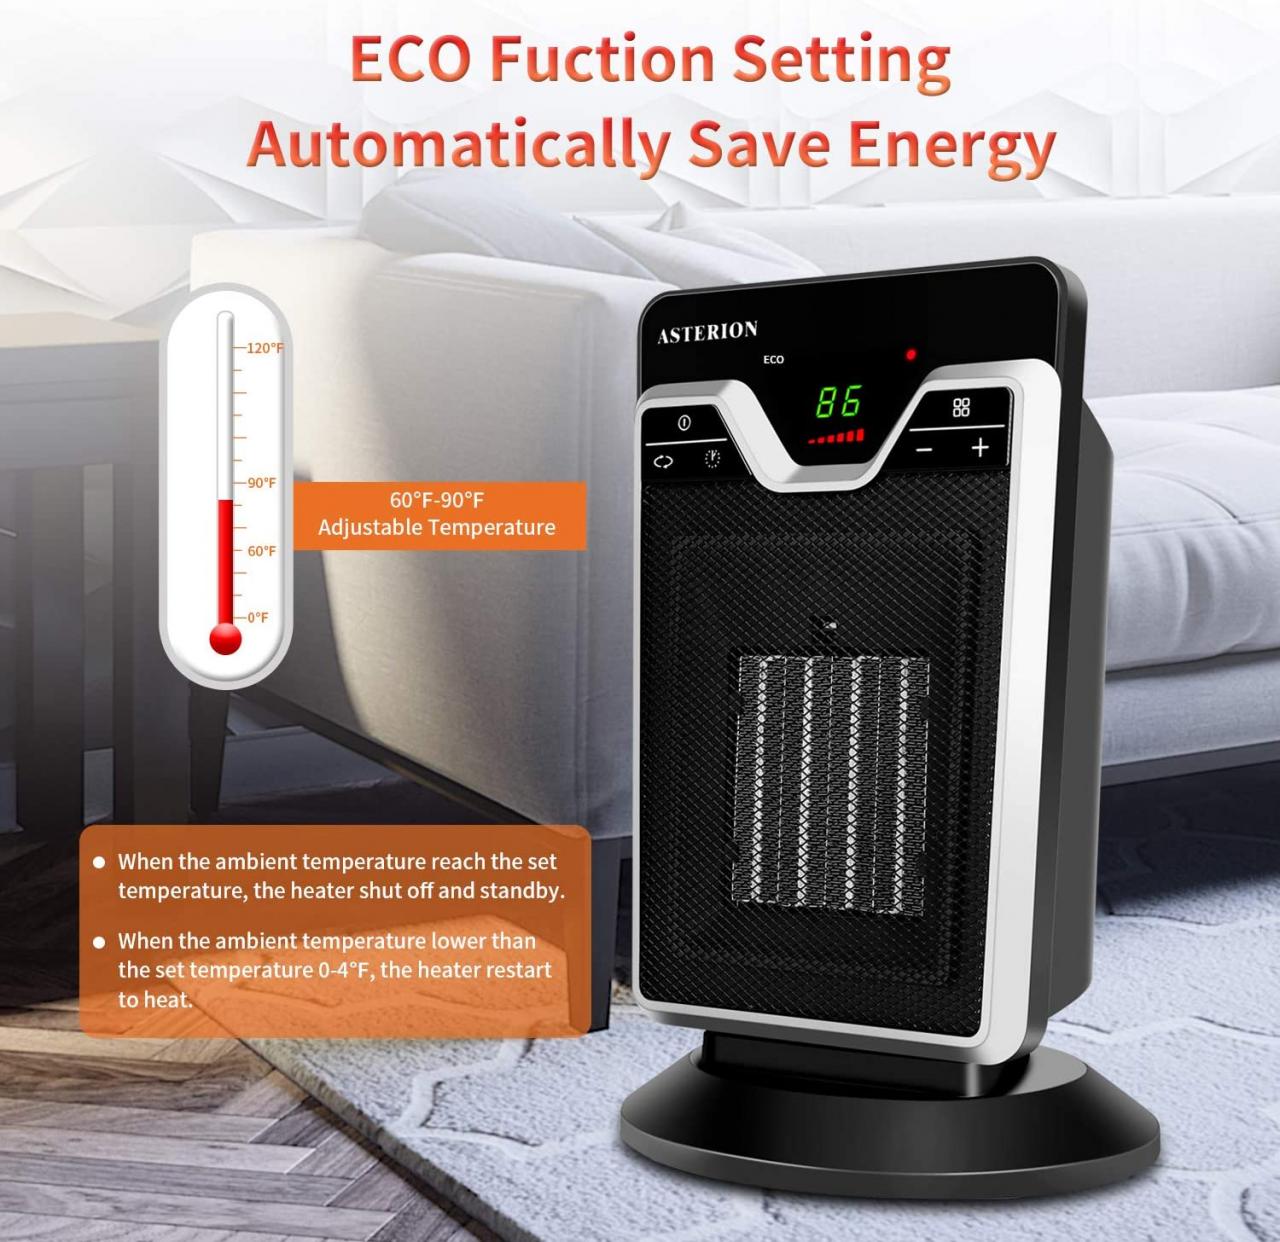 Oscillating Space Heater – Ceramic Forced Fan Heating with Stay Cool  Housing - Tower with Remote Control, Digital Thermostat, Timer, Large  Temperature Display and Efficient ECO Mode - by Bovado USA | Pricepulse